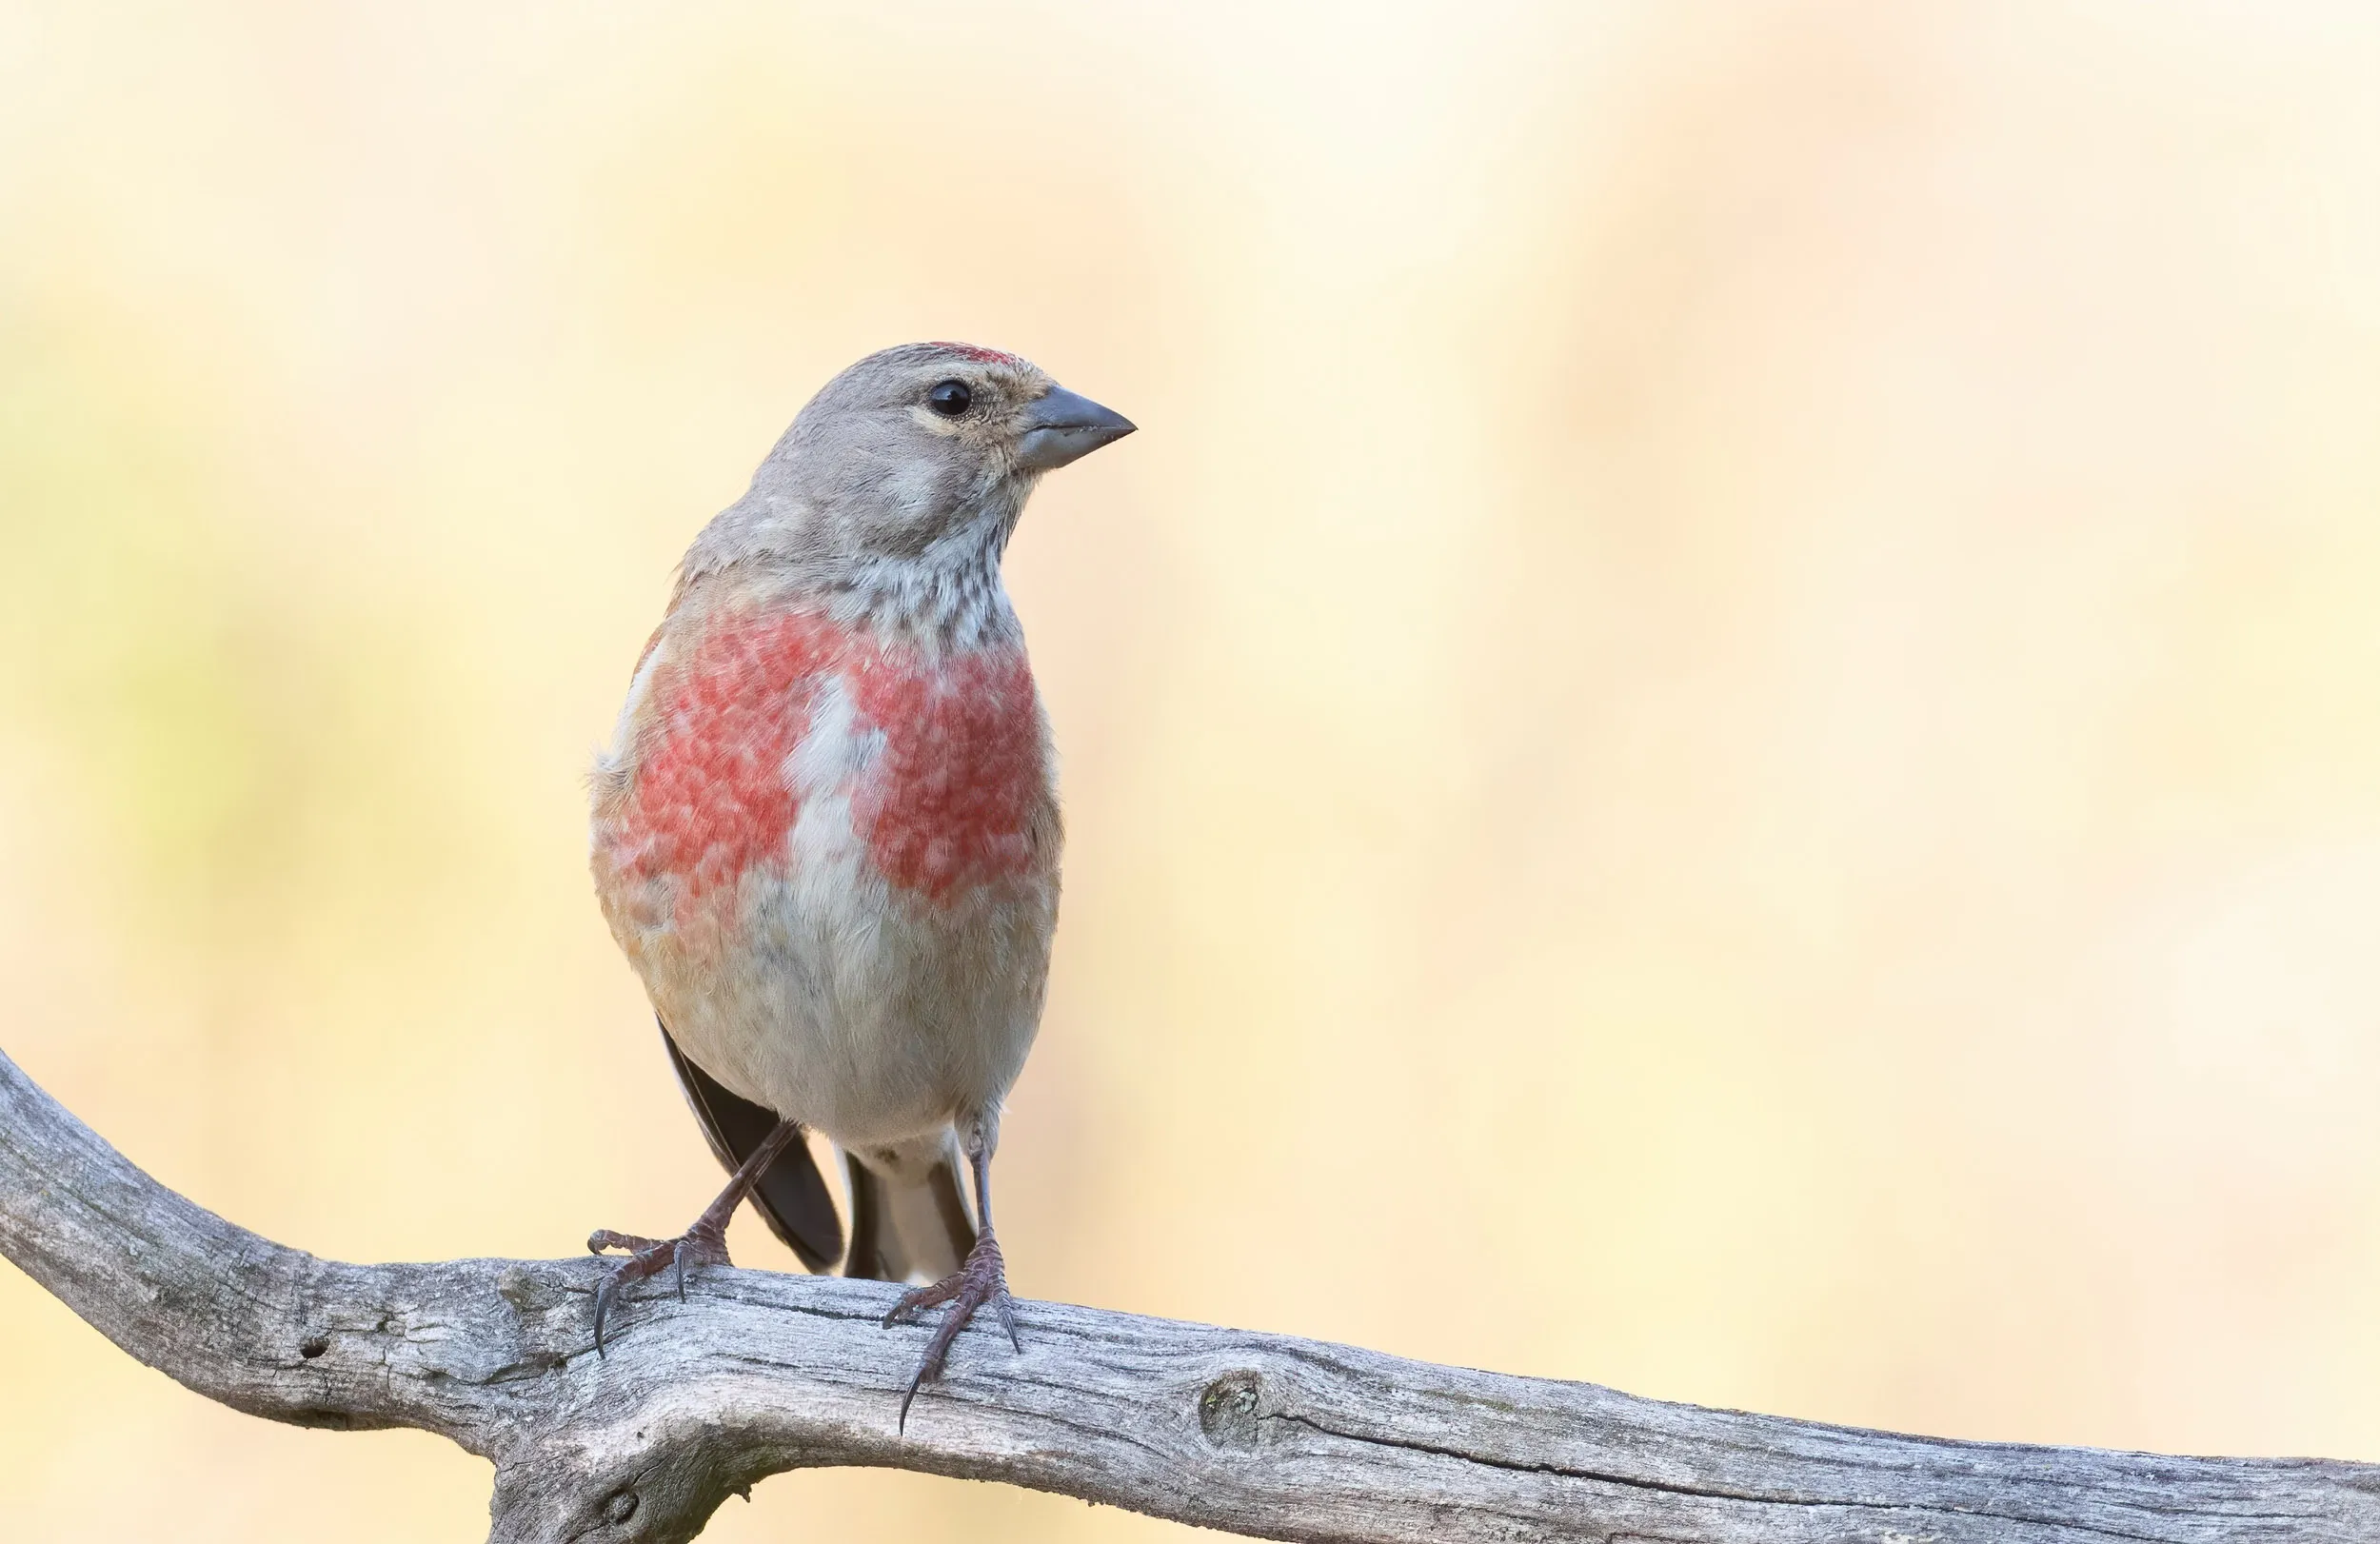 A Linnet perched on a branch checks out the camera.